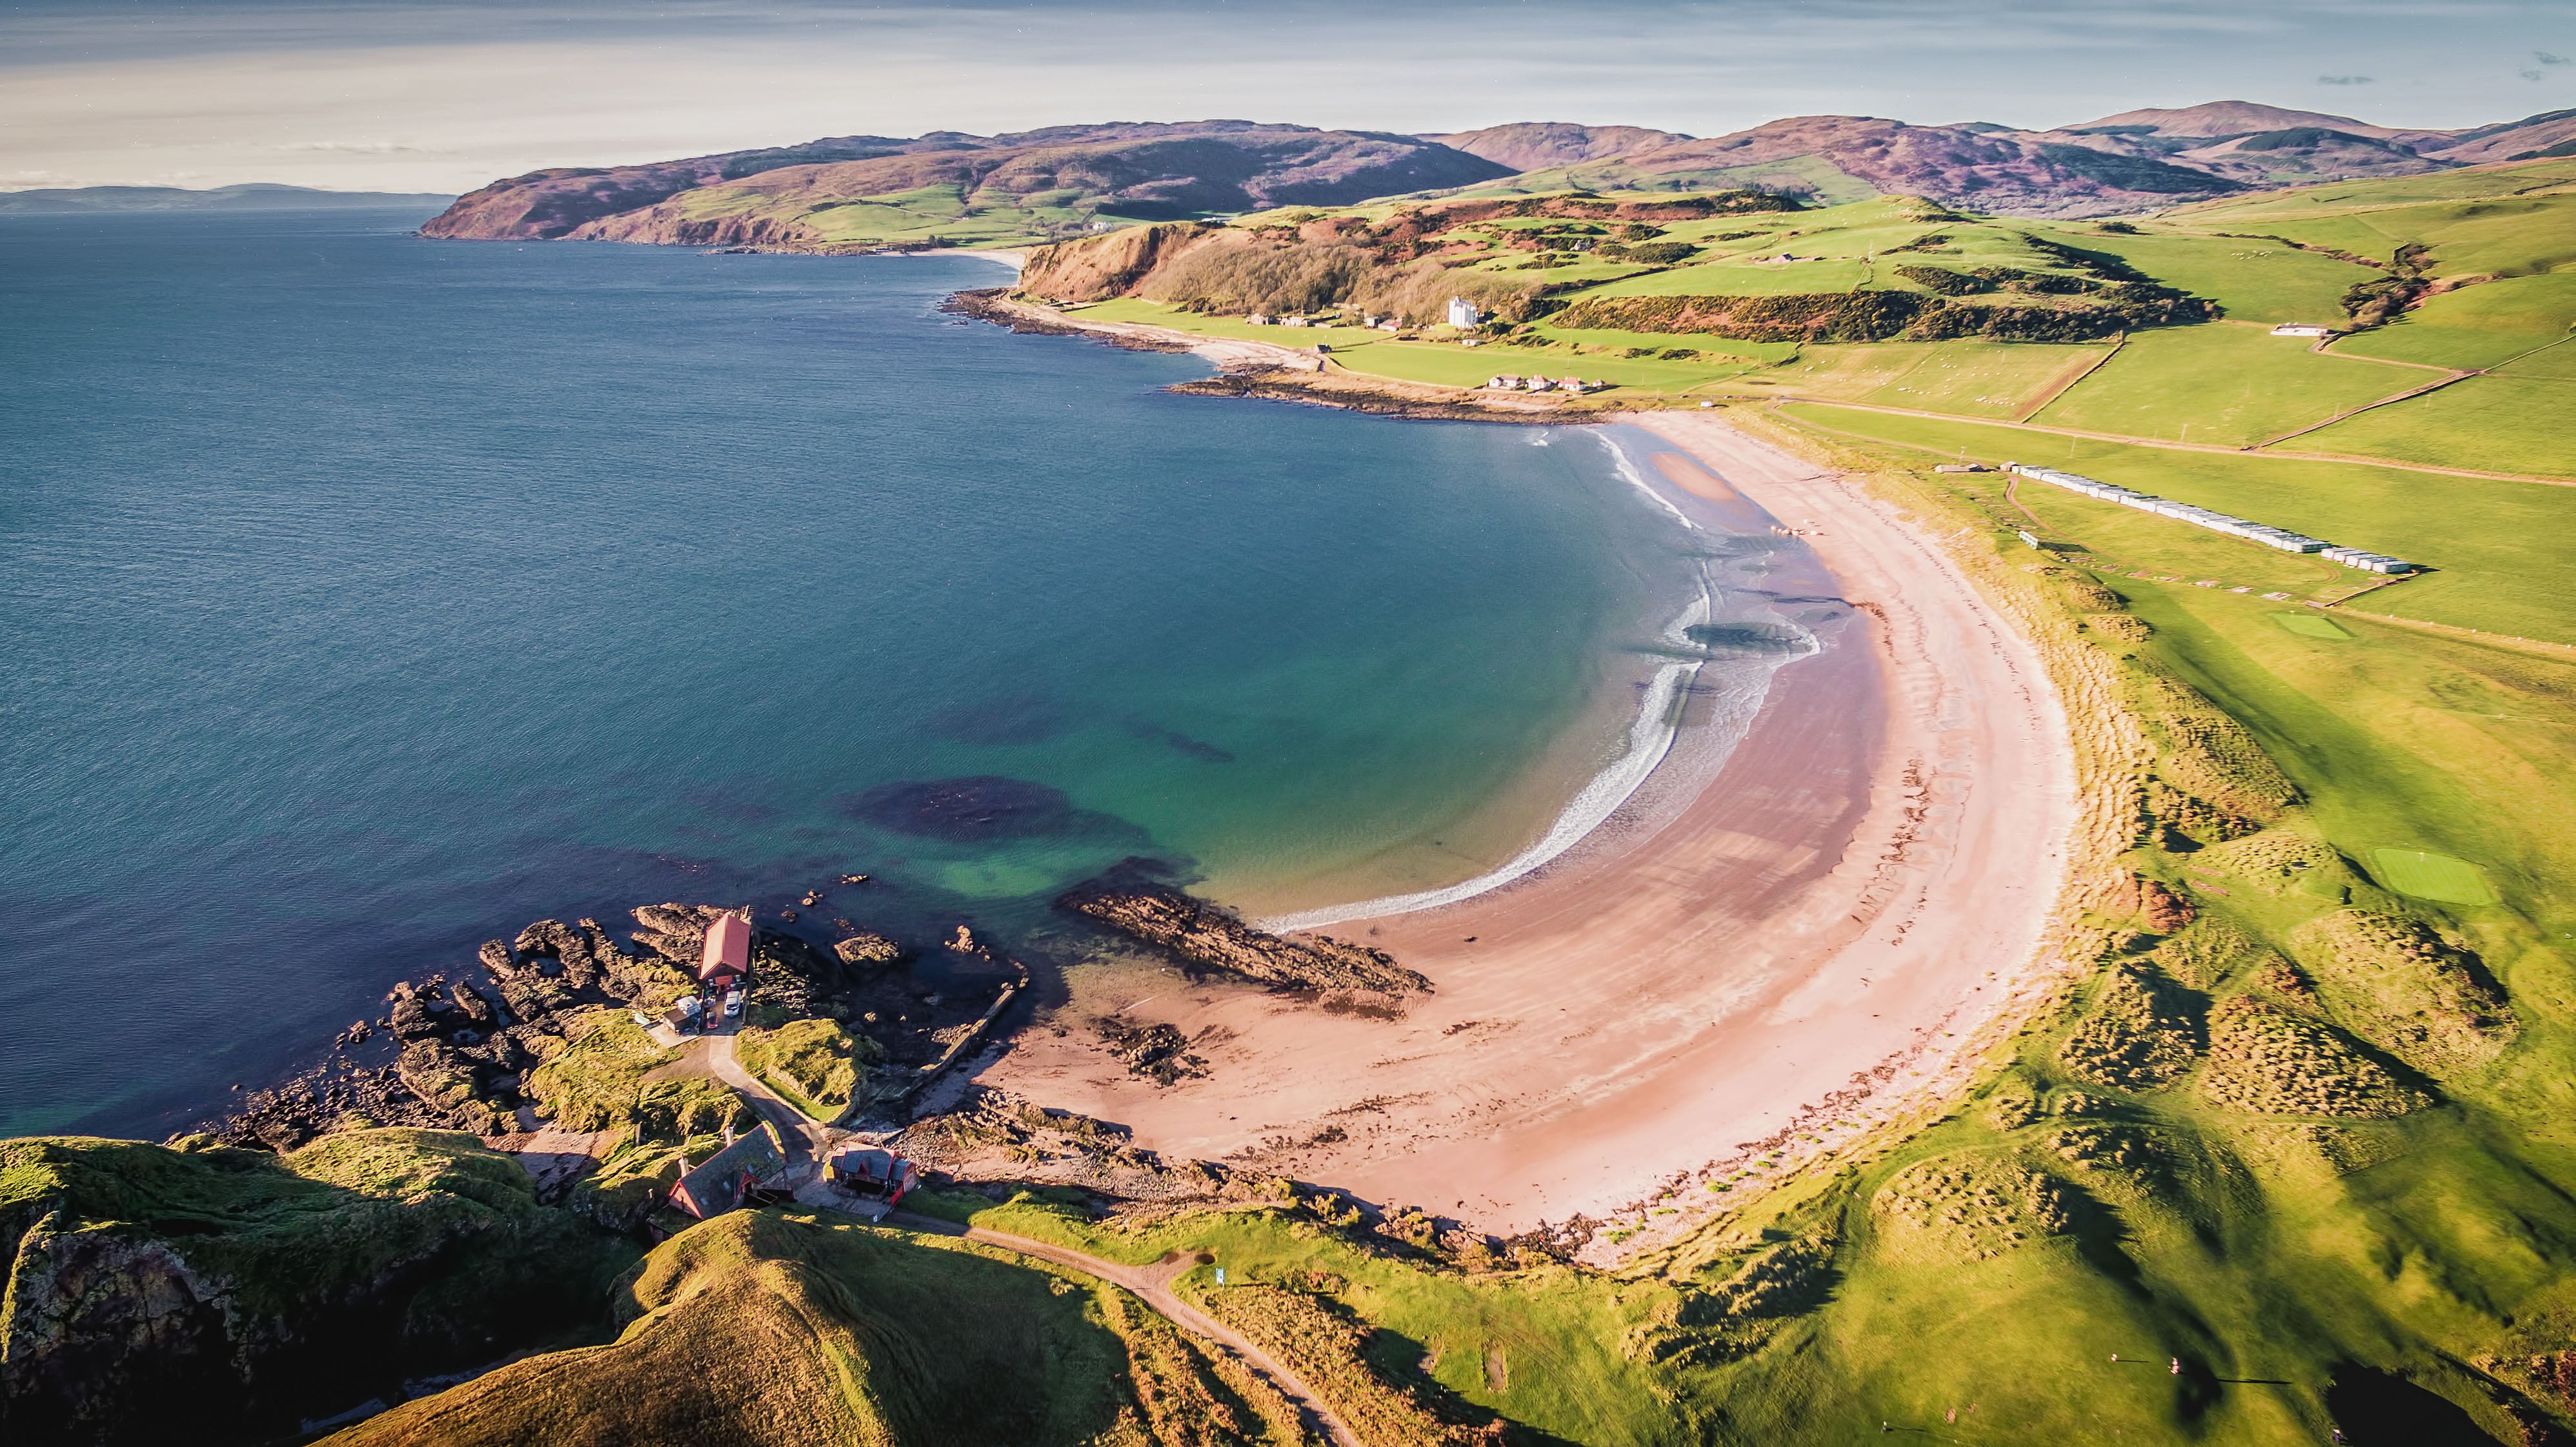 The sweeping shores of Dunaverty Bay